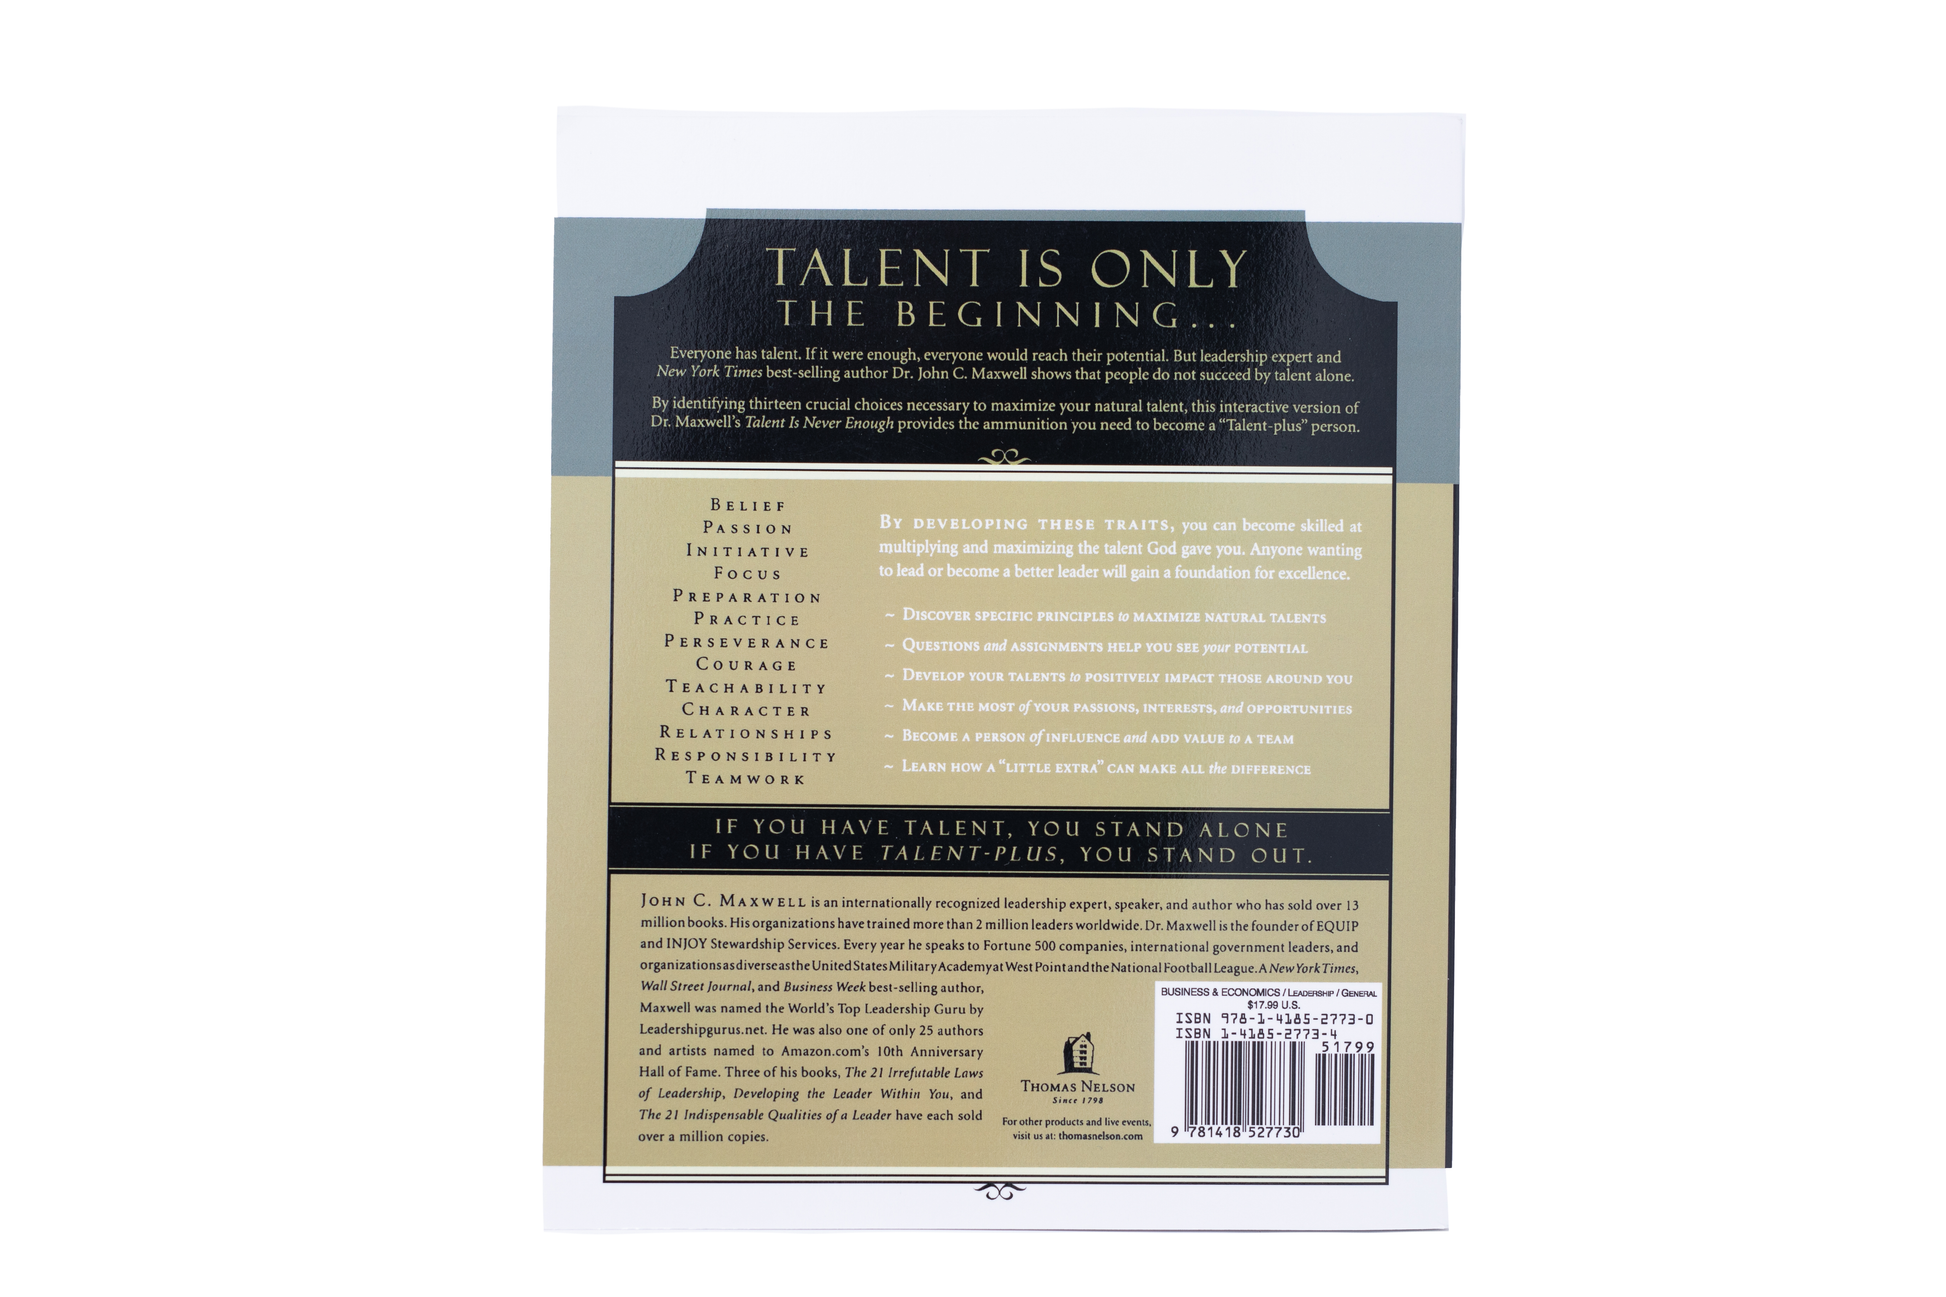 Talent is Never Enough Workbook